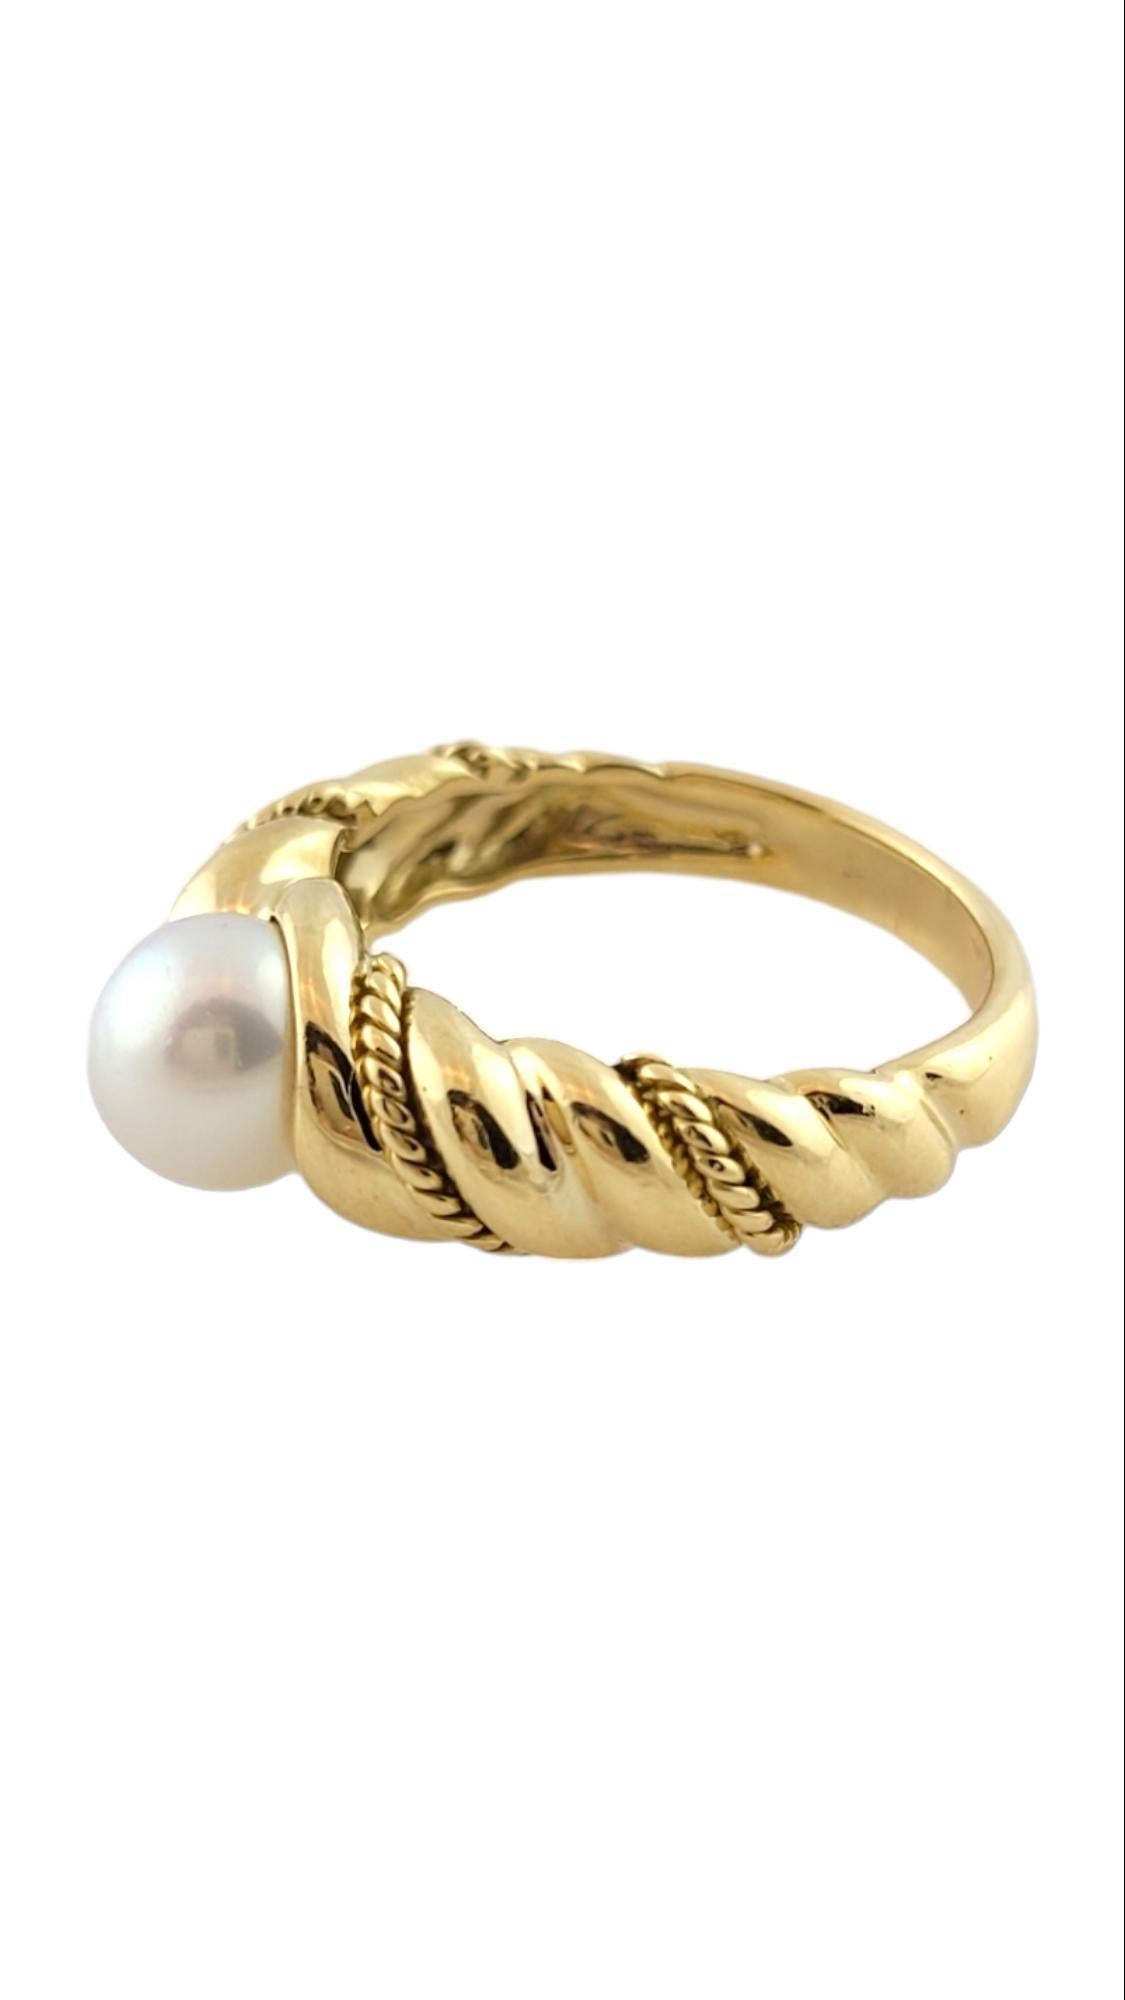 Vintage Tiffany & Co. 18K Yellow Gold Pearl Ring Size 7.25

This gorgeous Tiffany & Co ring has an 18K yellow gold band with a twisted pattern and features a beautiful 8mm pearl in the center!

Ring size: 7.25
Shank: 3.10mm
Pearl size: 8mm

Weight: